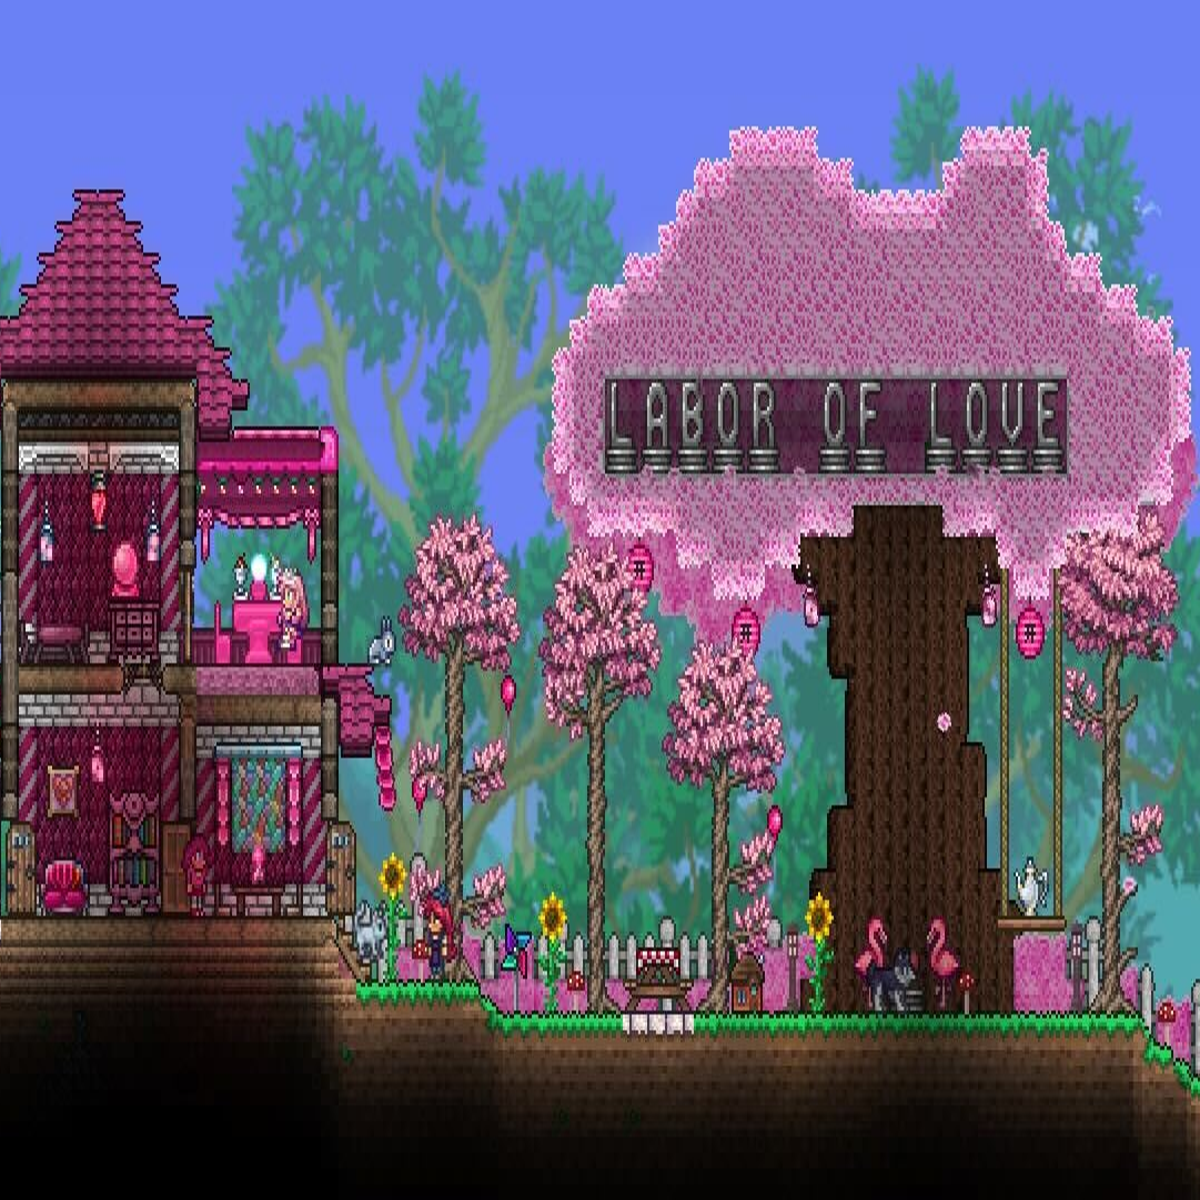 Terraria devs plan to tackle crossplay after next update